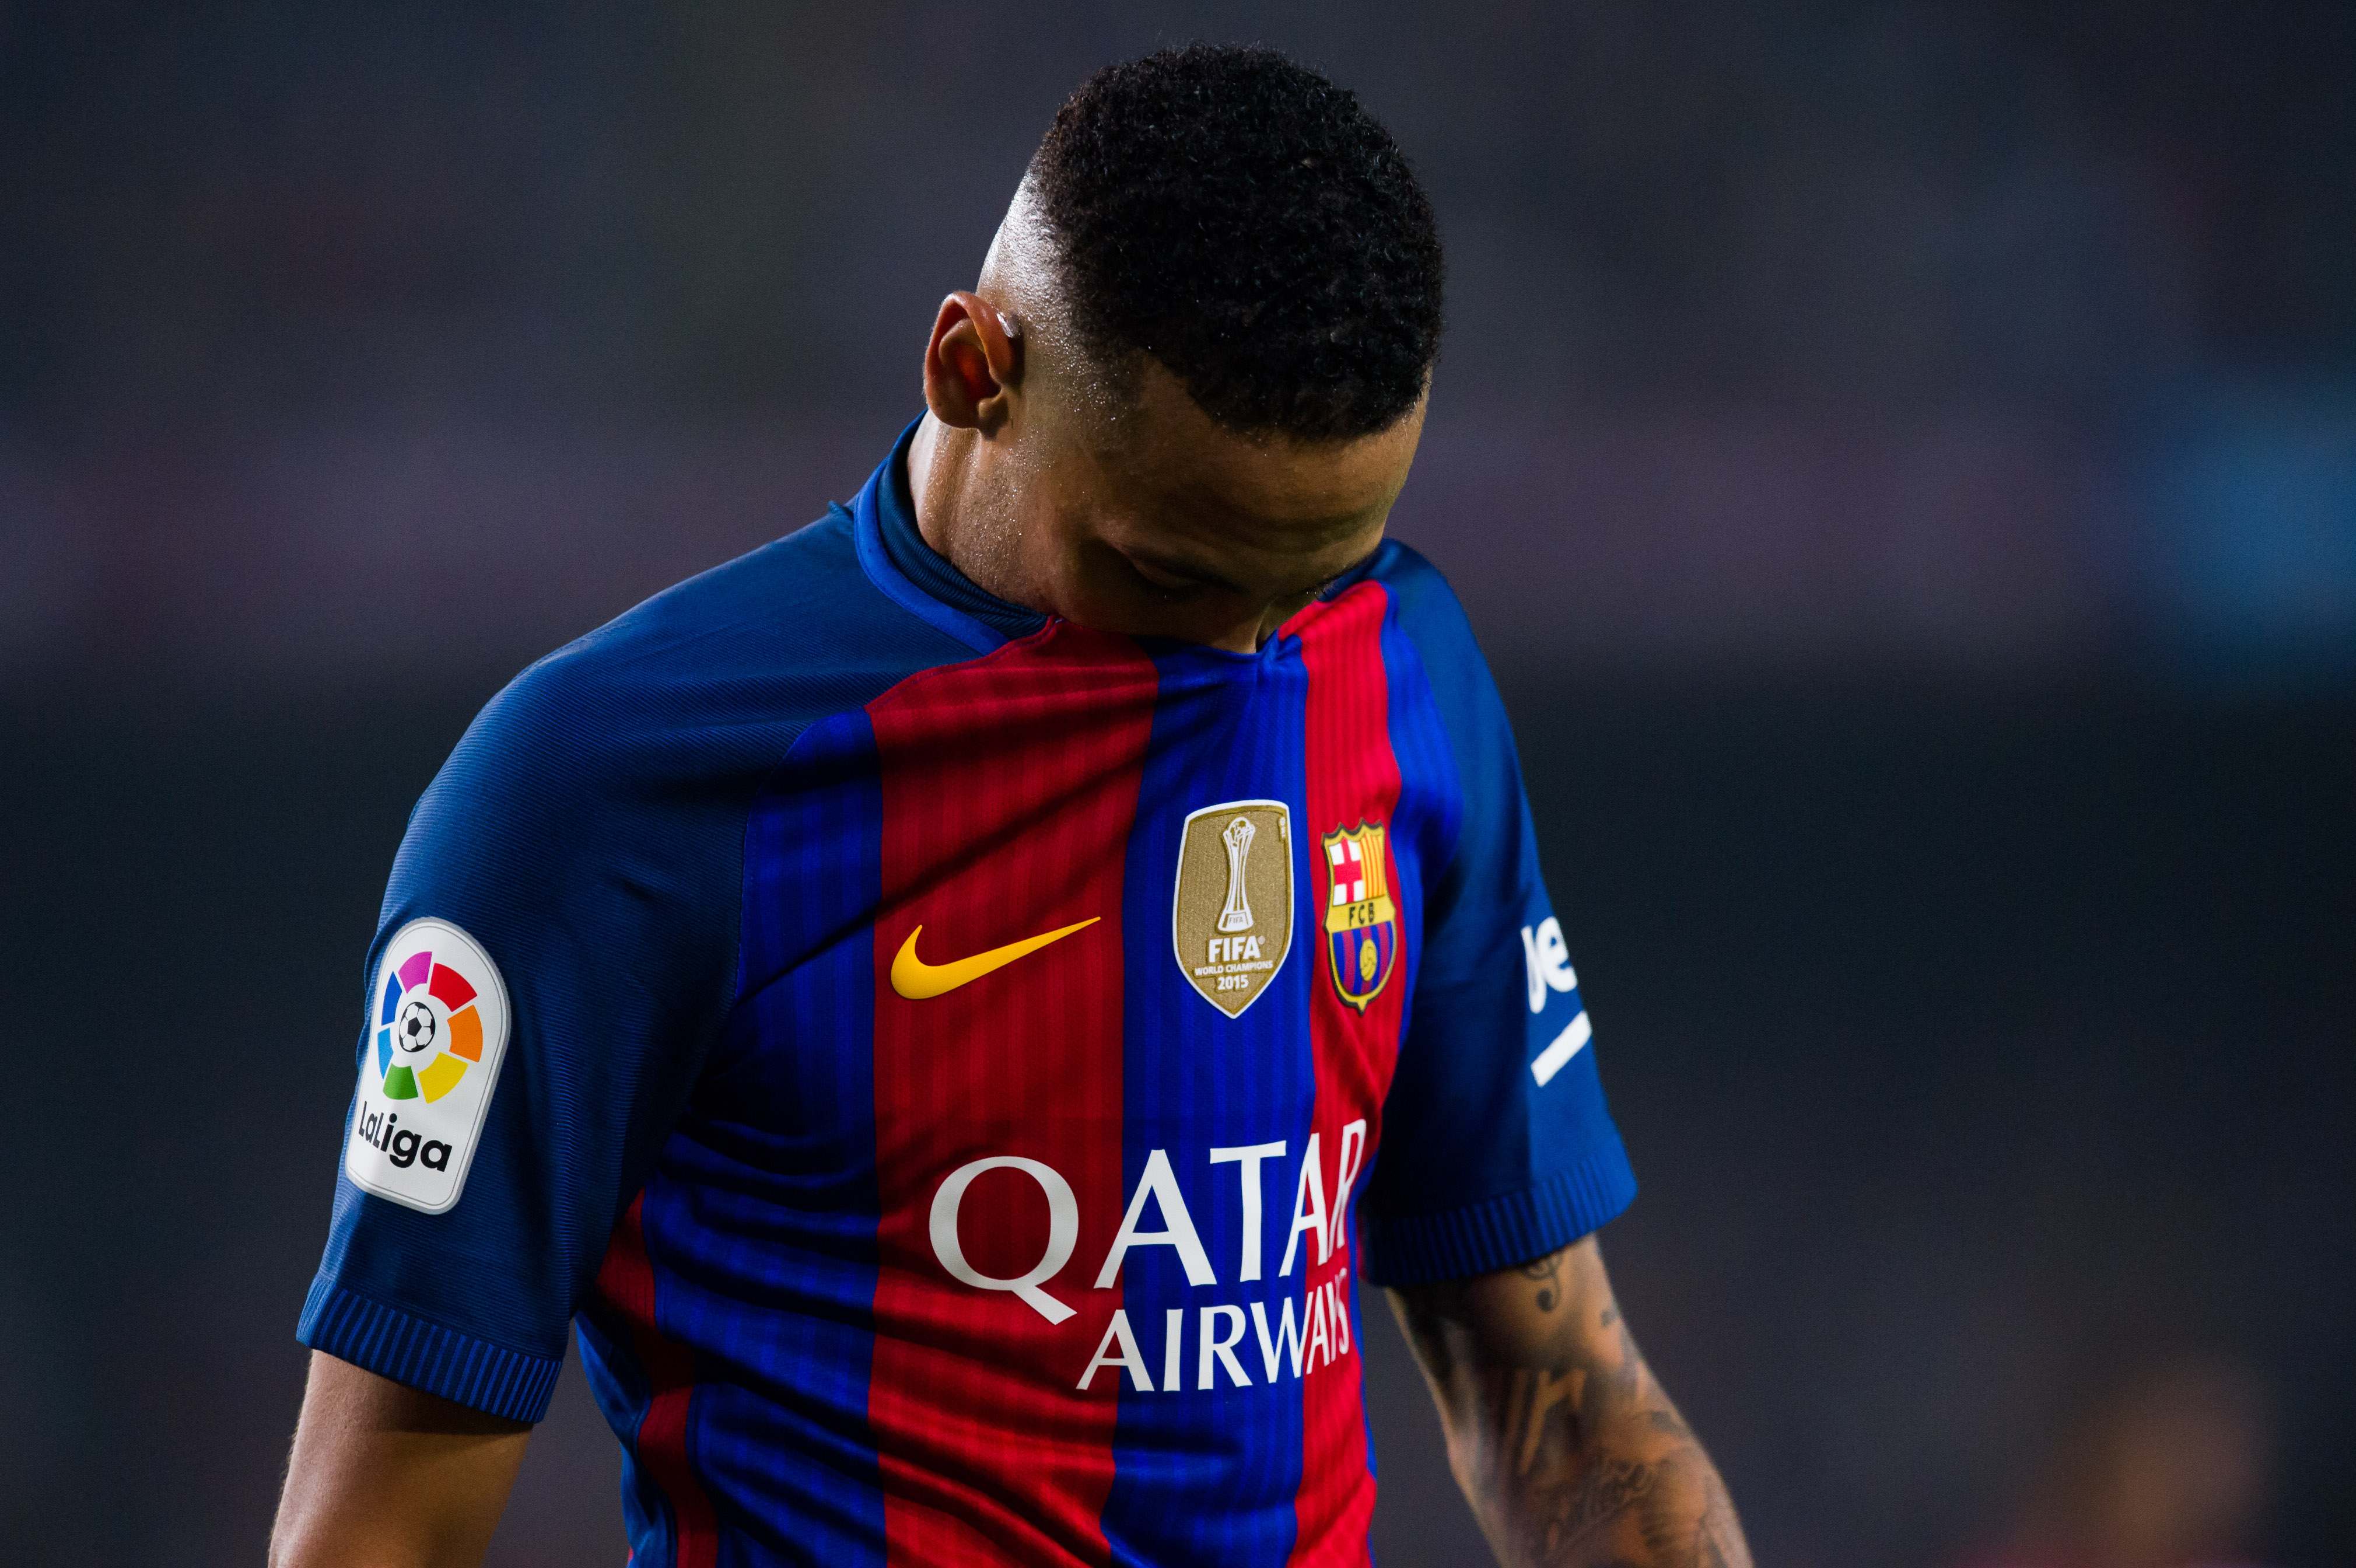 BARCELONA, SPAIN - OCTOBER 29:  Neymar Santos Jr of FC Barcelona reacts during the La Liga match between FC Barcelona and Granada CF at Camp Nou stadium on October 29, 2016 in Barcelona, Spain.  (Photo by Alex Caparros/Getty Images)